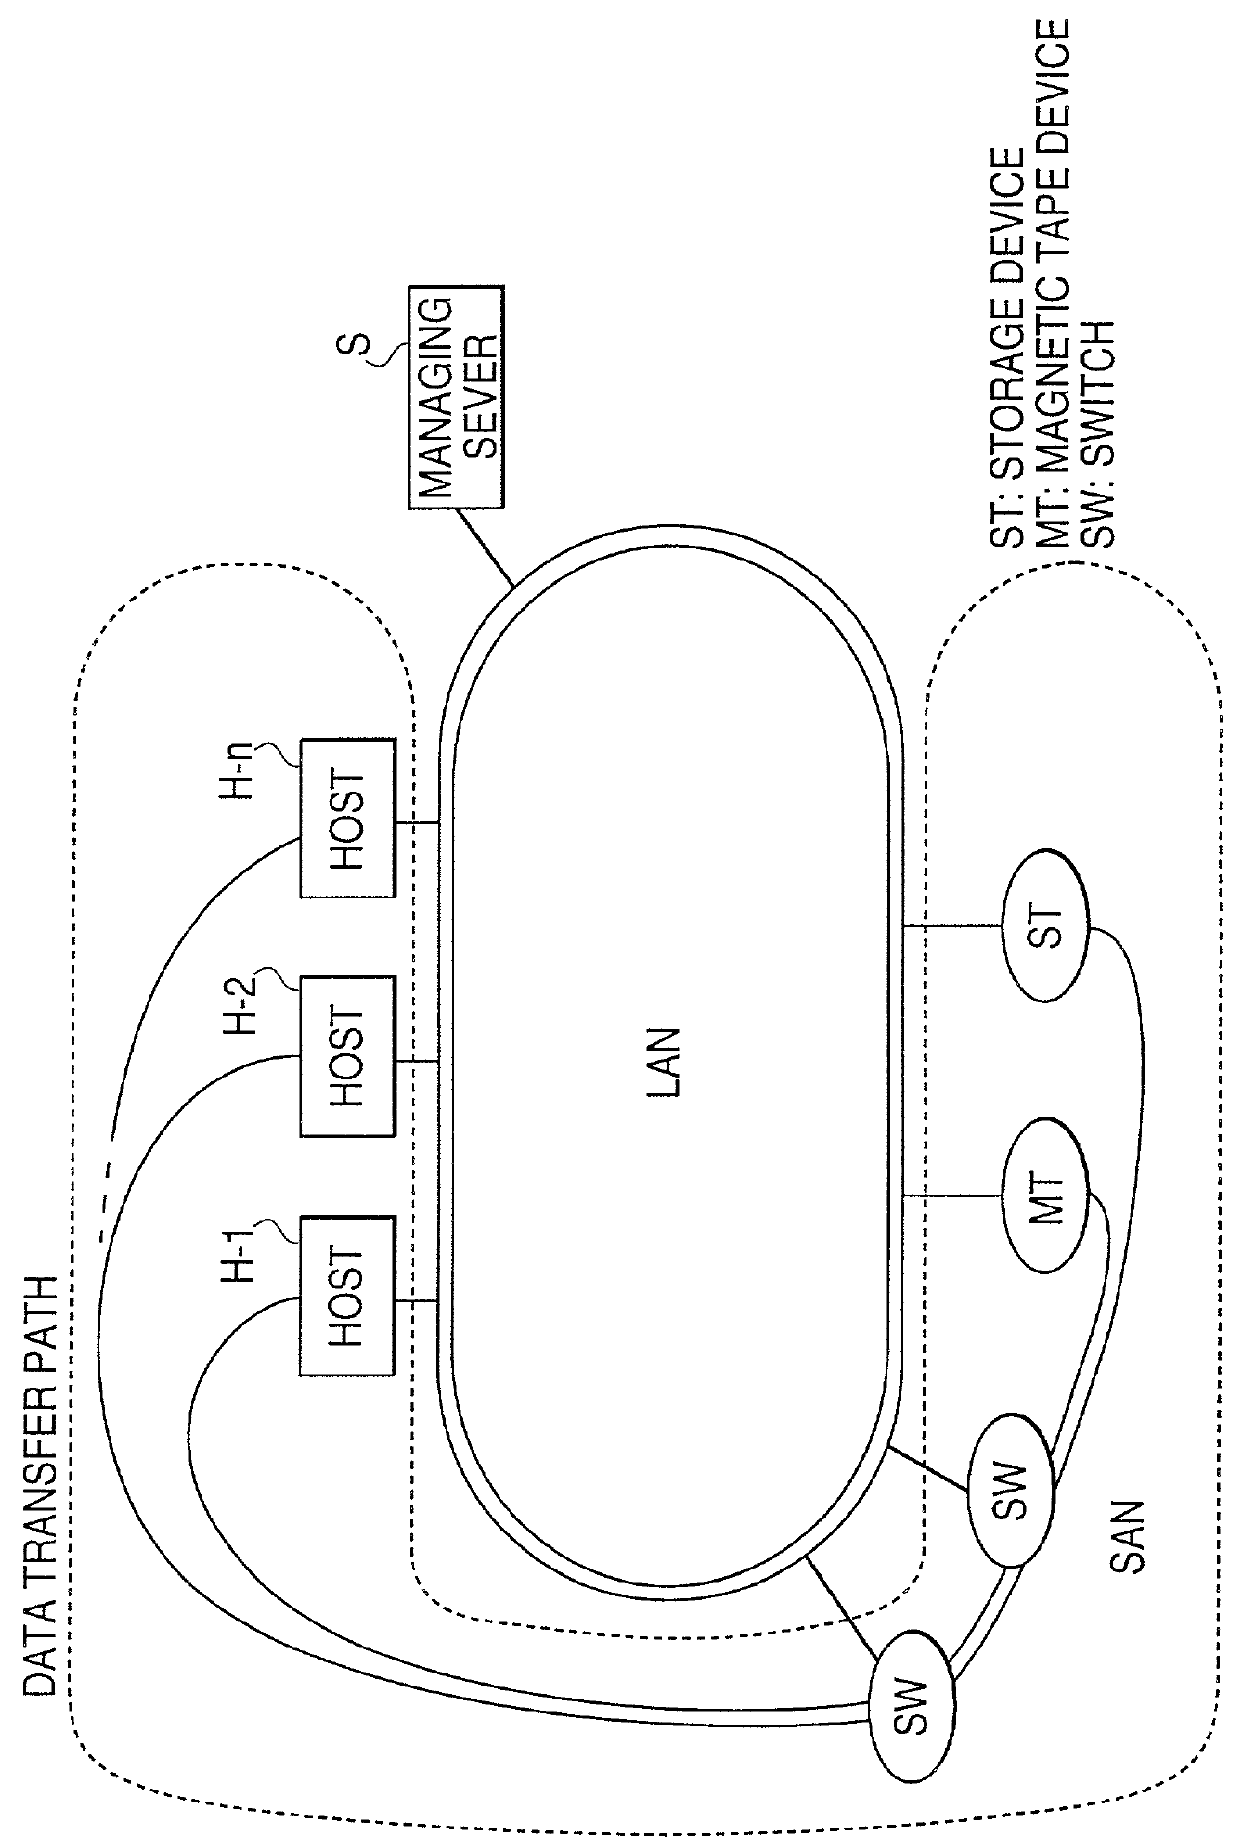 Storage area network management system, method, and computer-readable medium